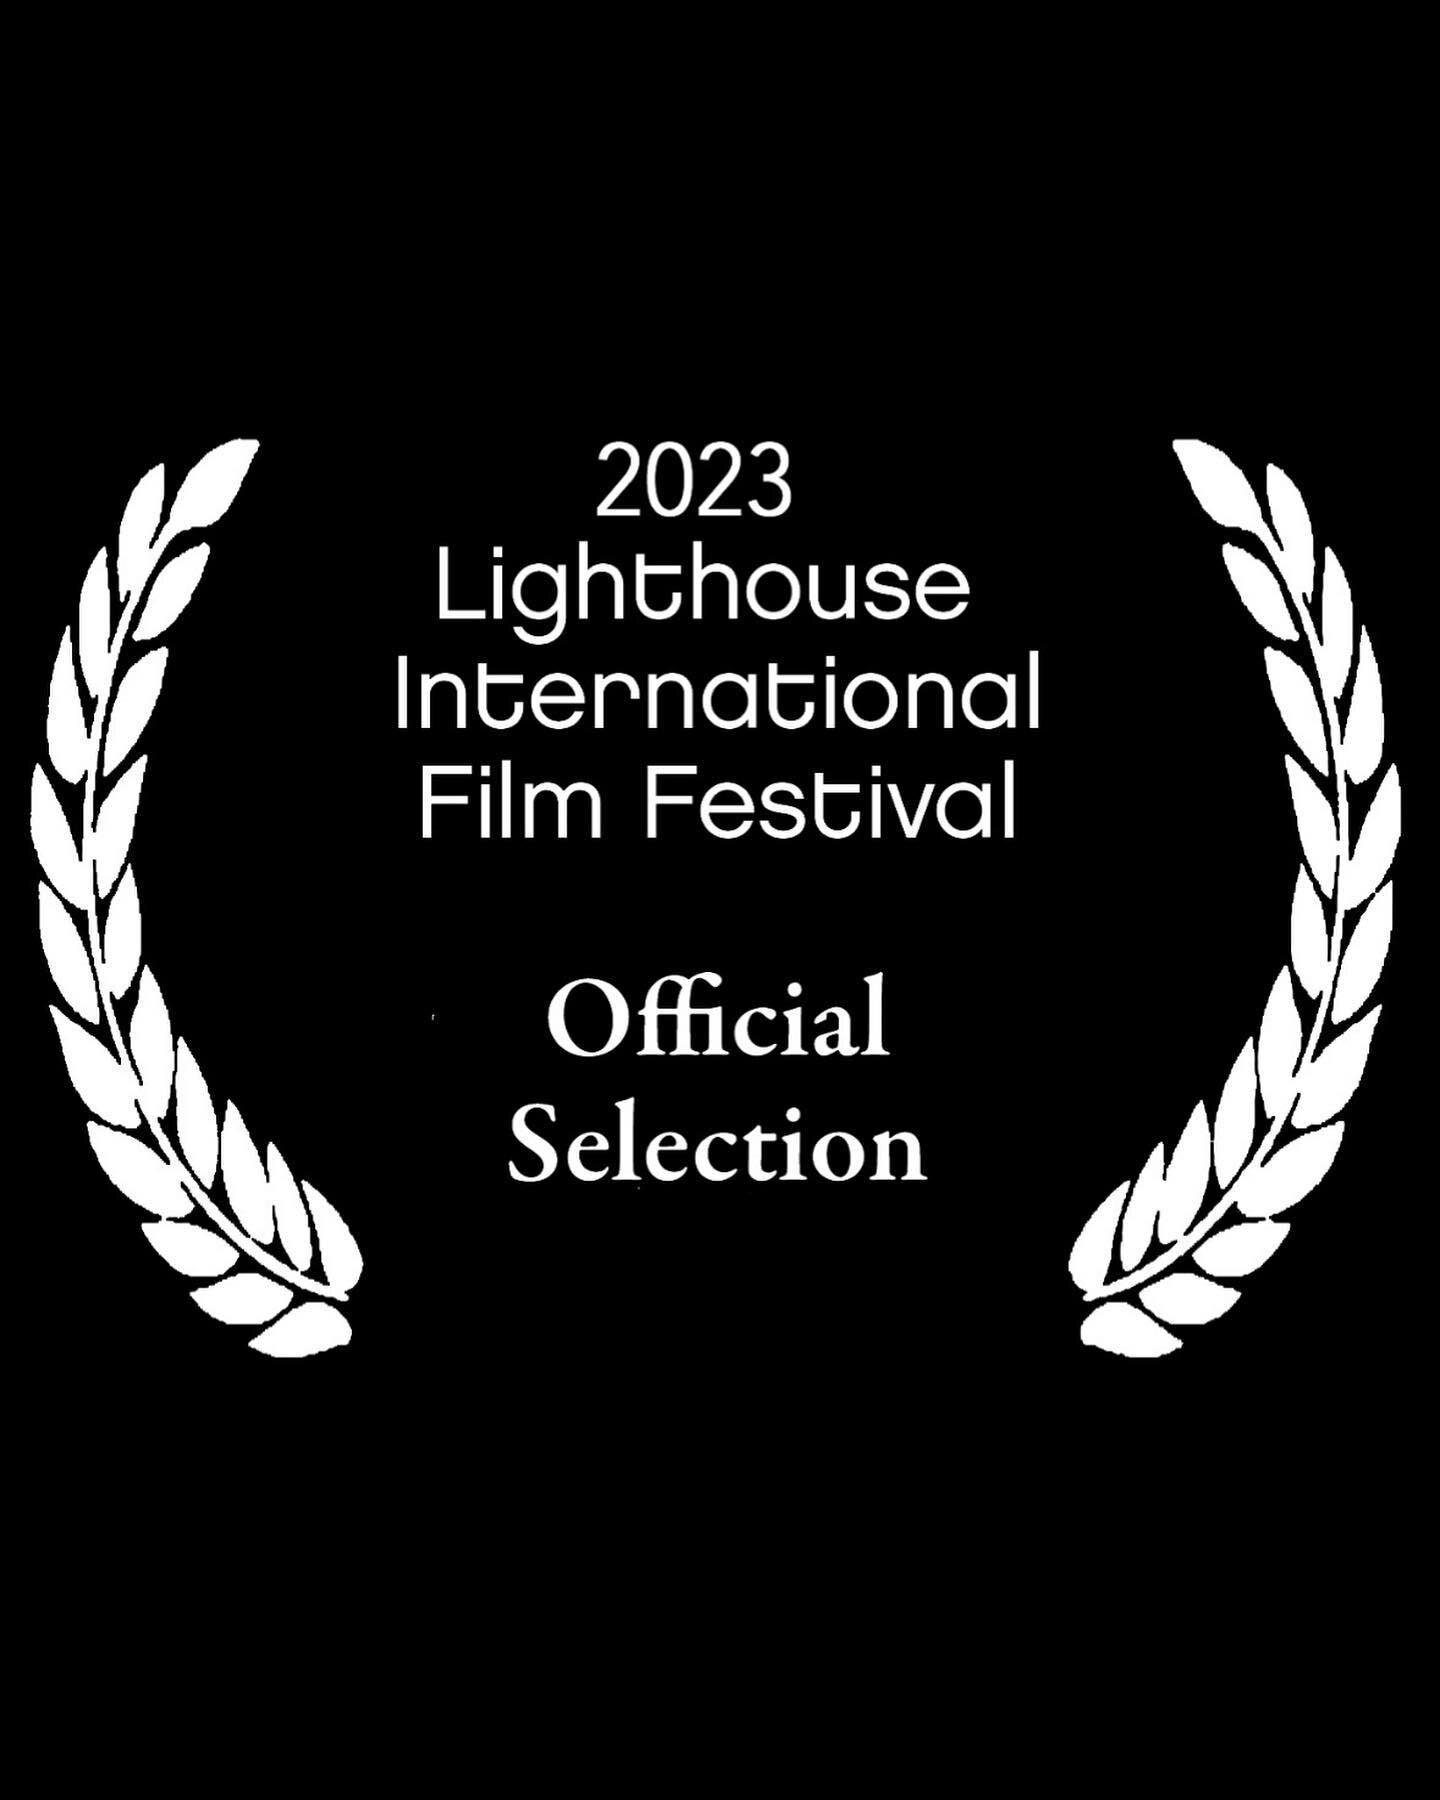 Pleased to announced Roundabout has been officially selected to the 2023 @lighthouseinternationalfilm lineup!

@kyleklaus 
@raustinjr 
@v4virility 
#filmfestival #shortfilm